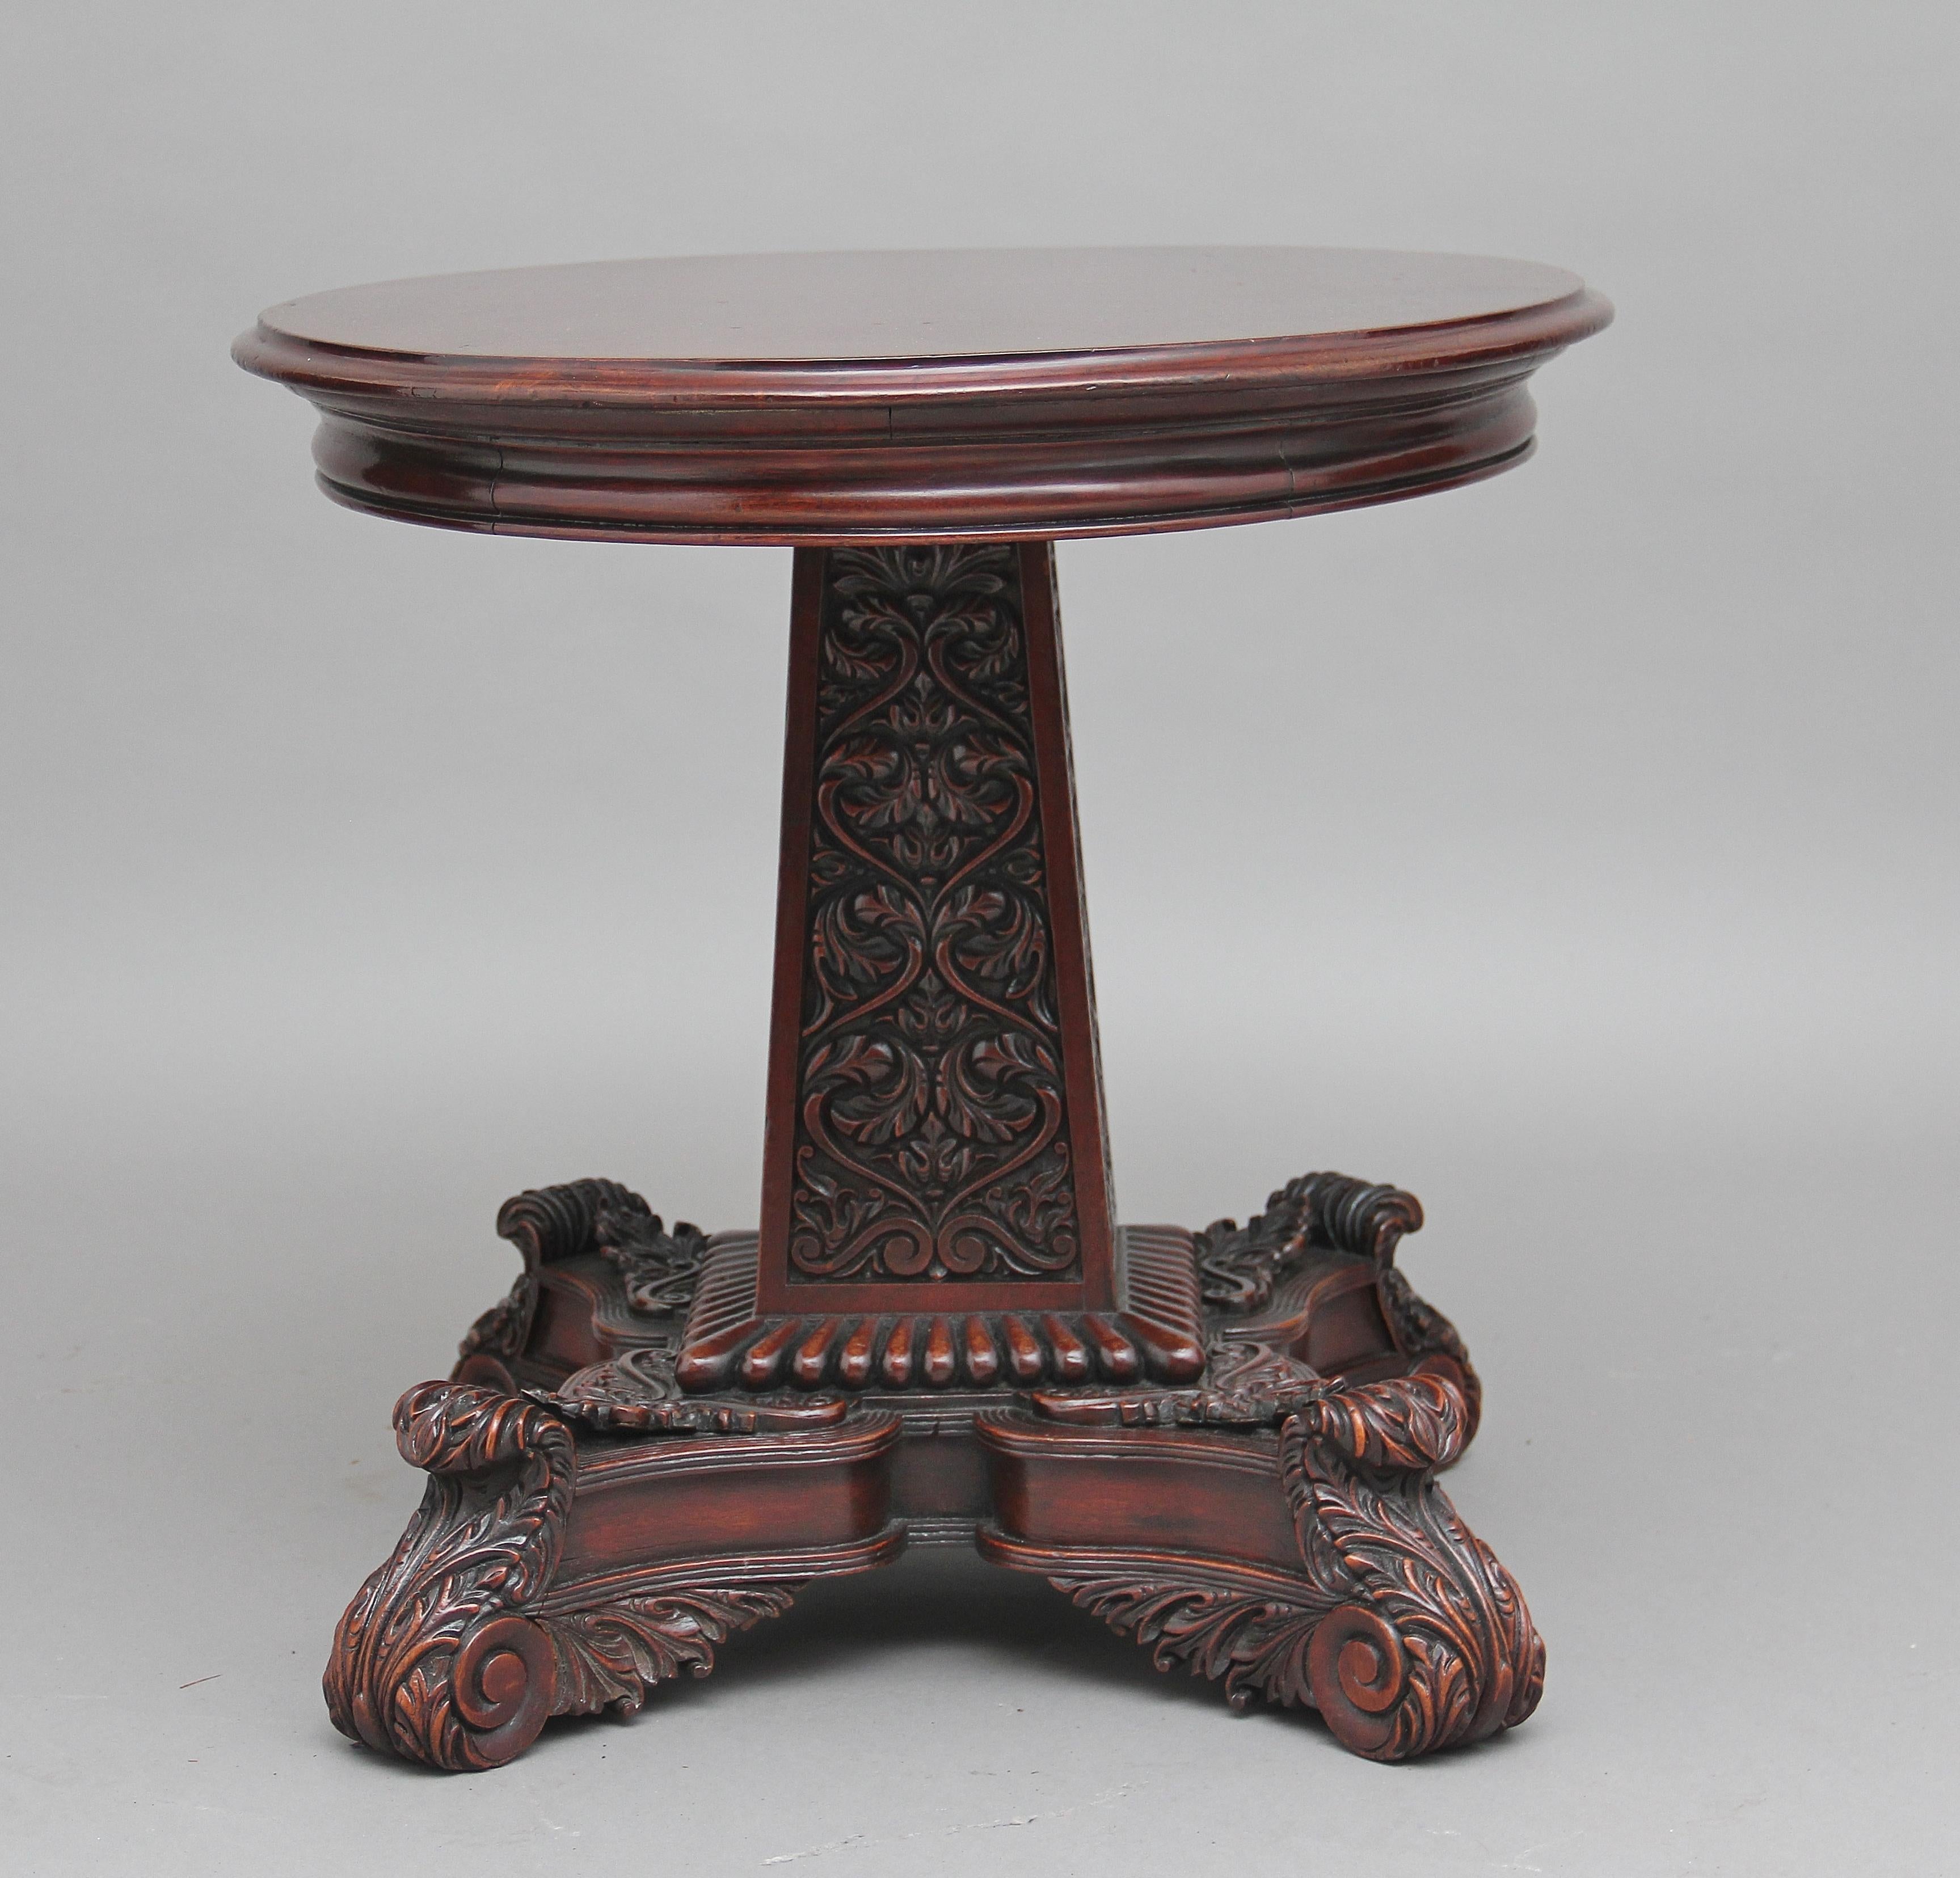 An impressive 19th century walnut carved occasional / coffee table, the molded edge oval top sitting on a fantastic highly carved base, the square tapering column having carved floral decoration on each side, with carved bead decoration at the